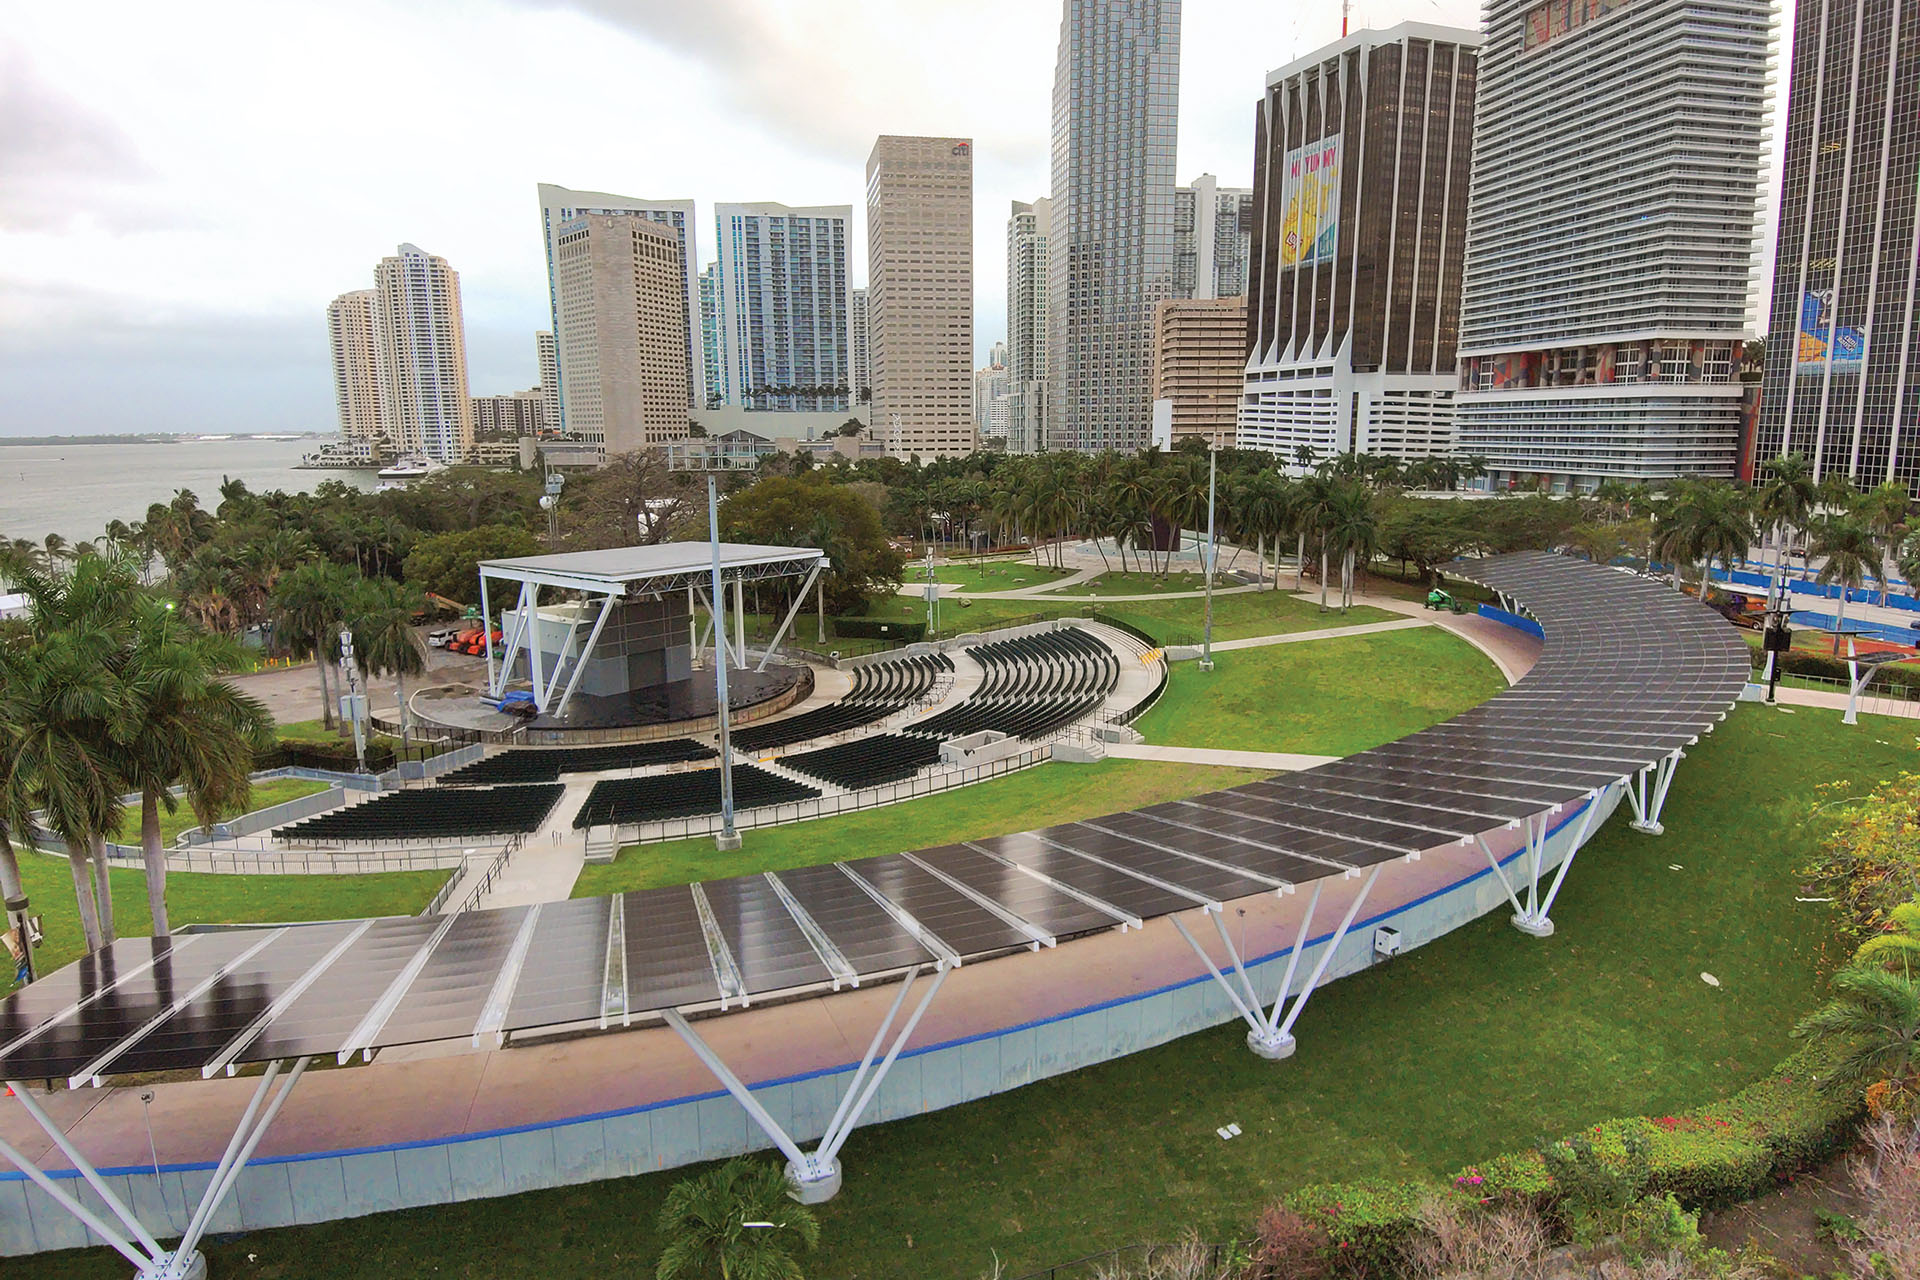 fpl-solar-amphitheater-at-bayfront-cic-pittsburgh